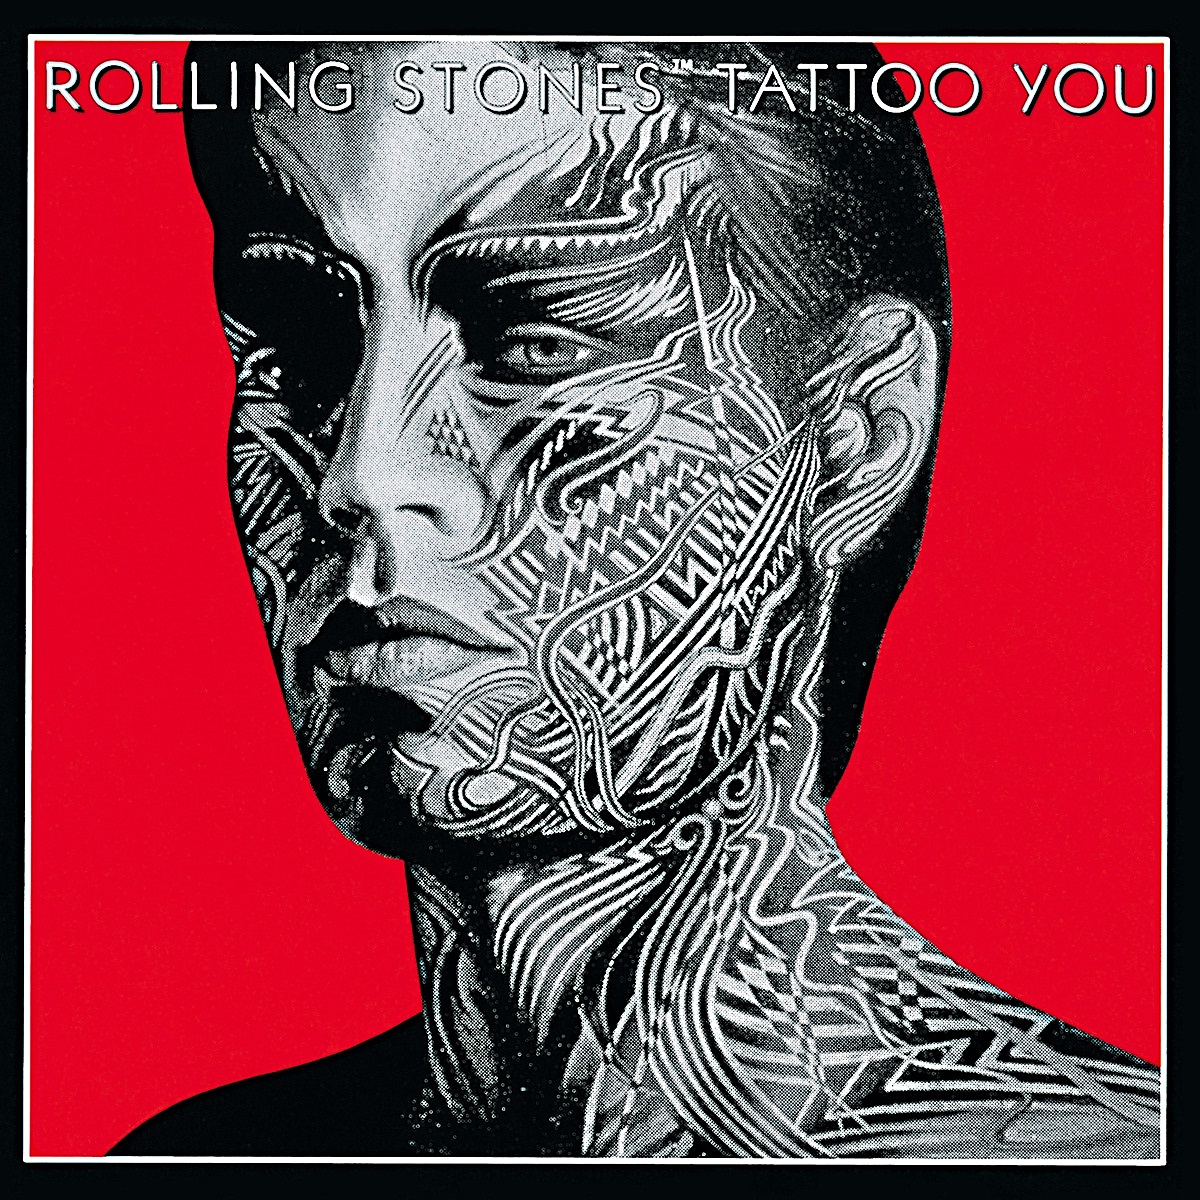 The Rolling Stones – Tattoo You (1981/2020) [FLAC 24bit/44,1kHz]